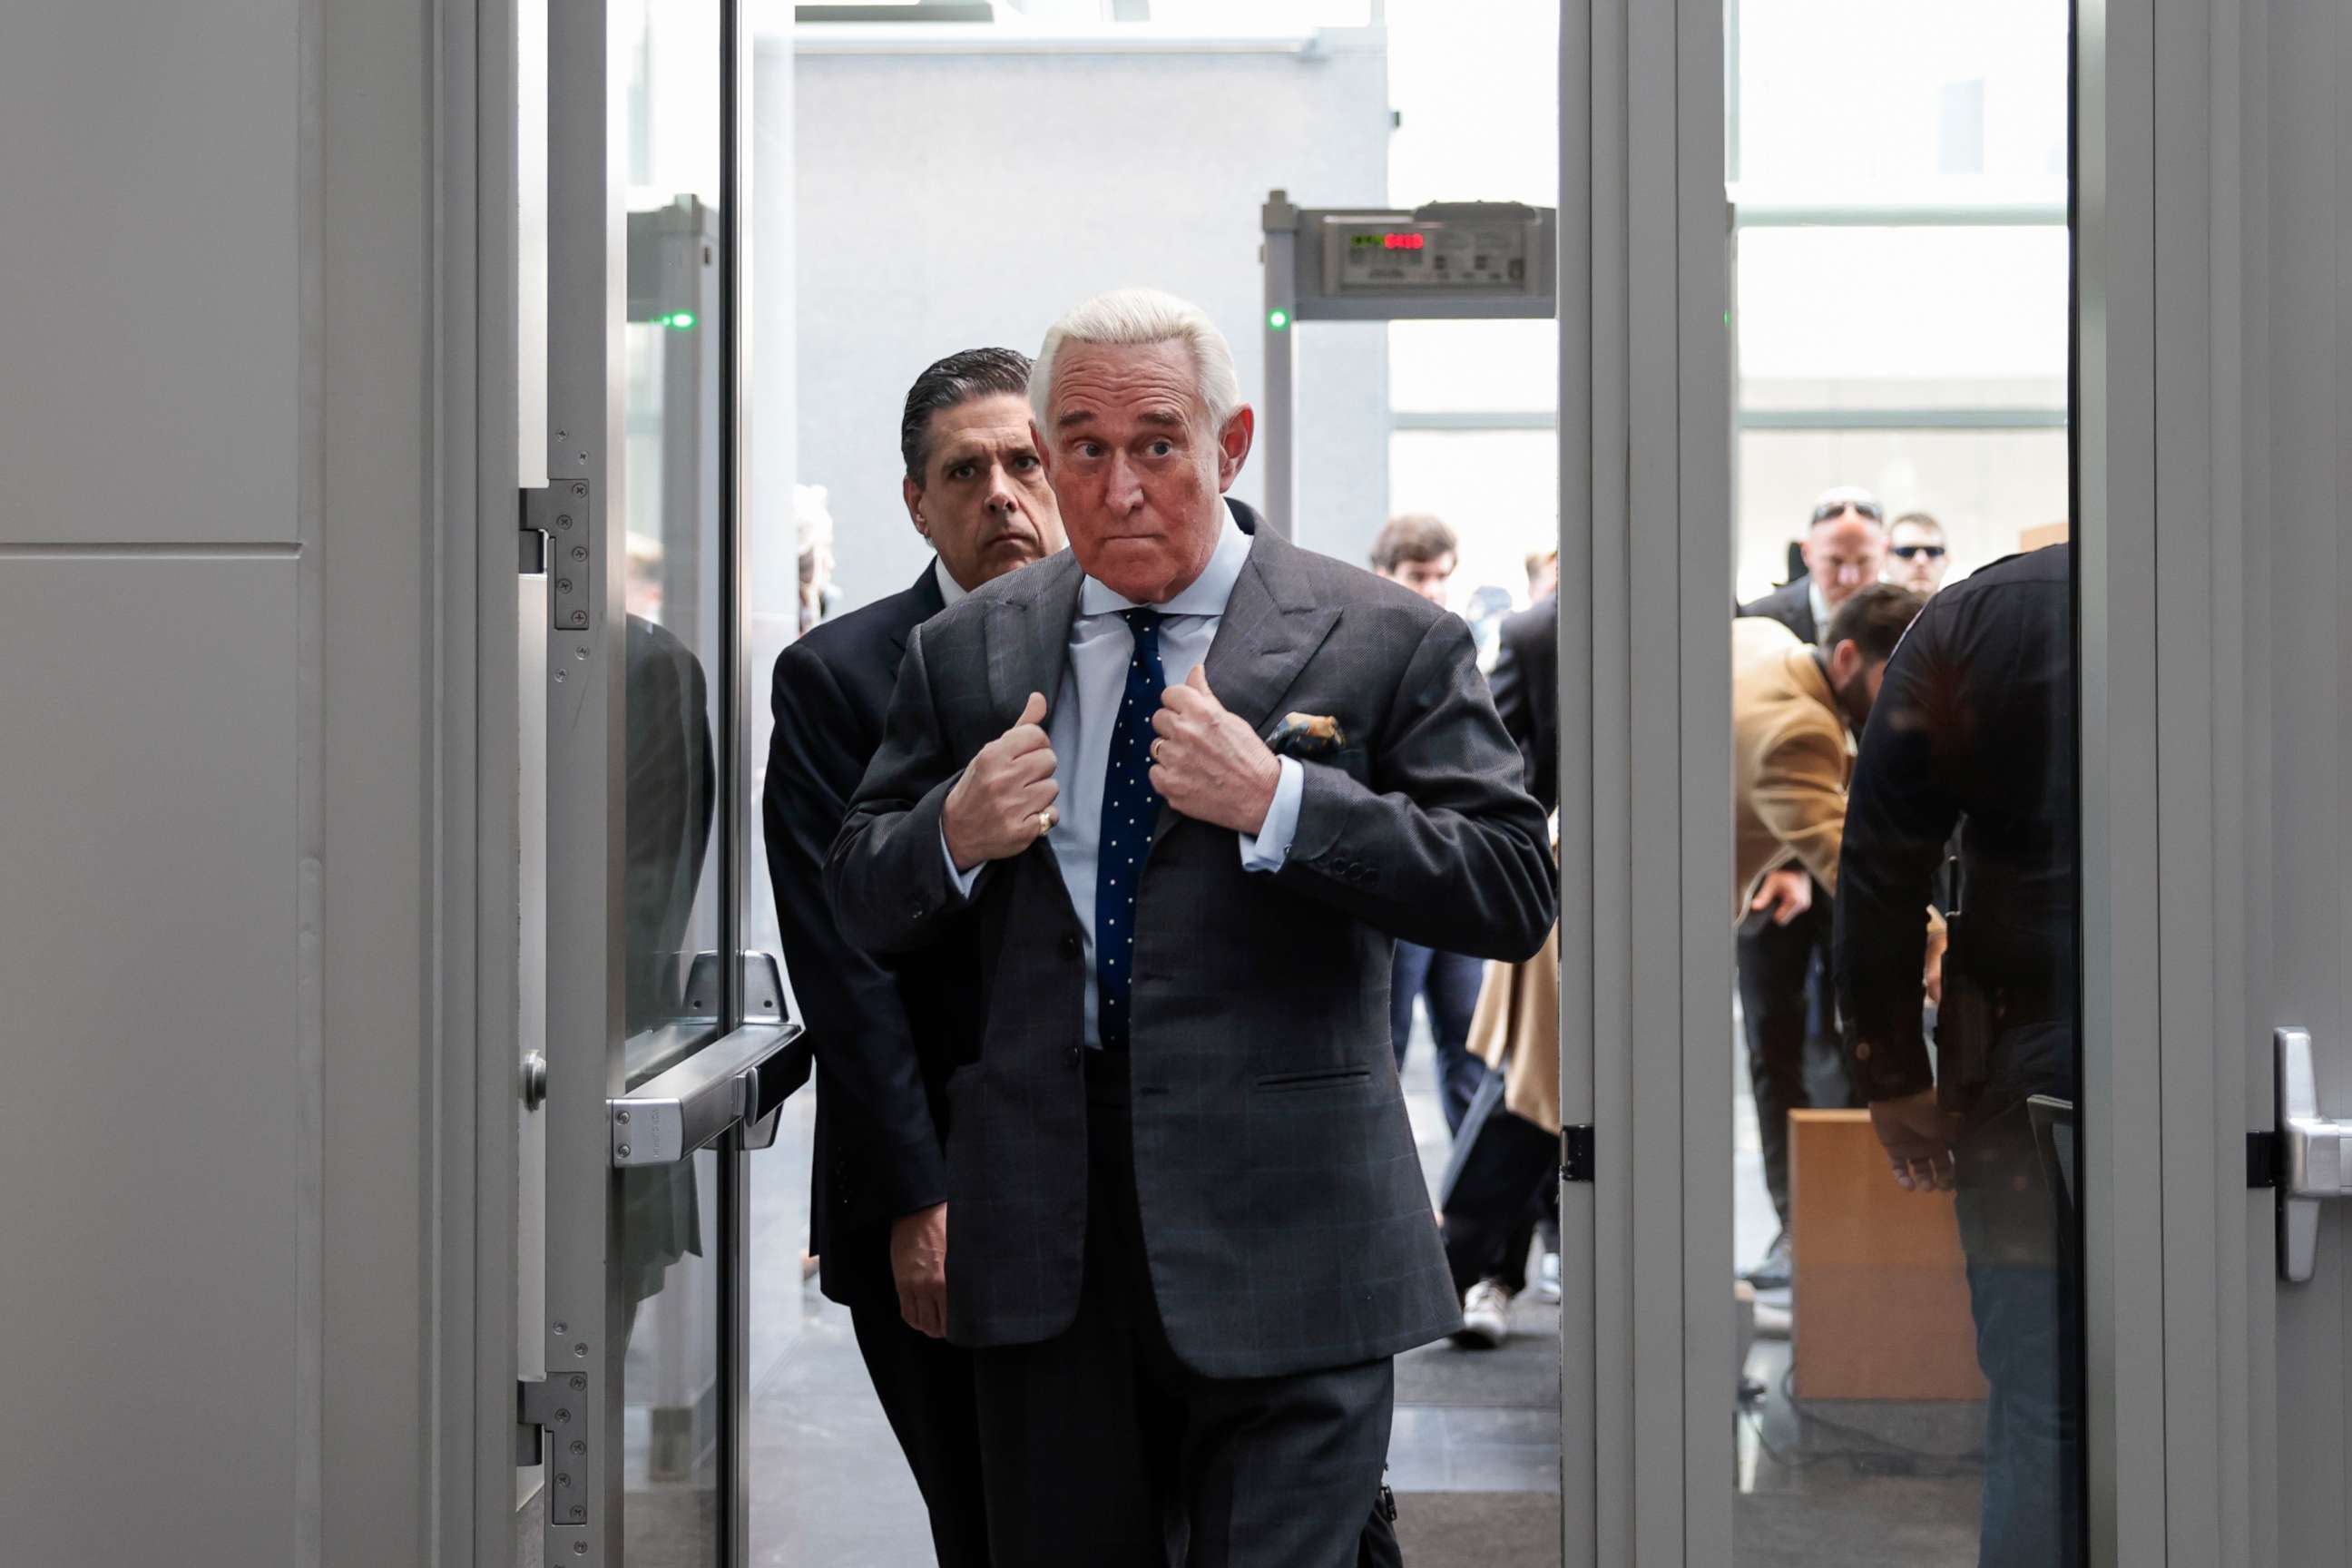 PHOTO: Roger Stone, a former adviser and confidante to President Donald Trump, arrives for a deposition before the House Select Committee investigating the January 6th Attack on the United States Capitol, Dec. 17, 2021, in Washington.